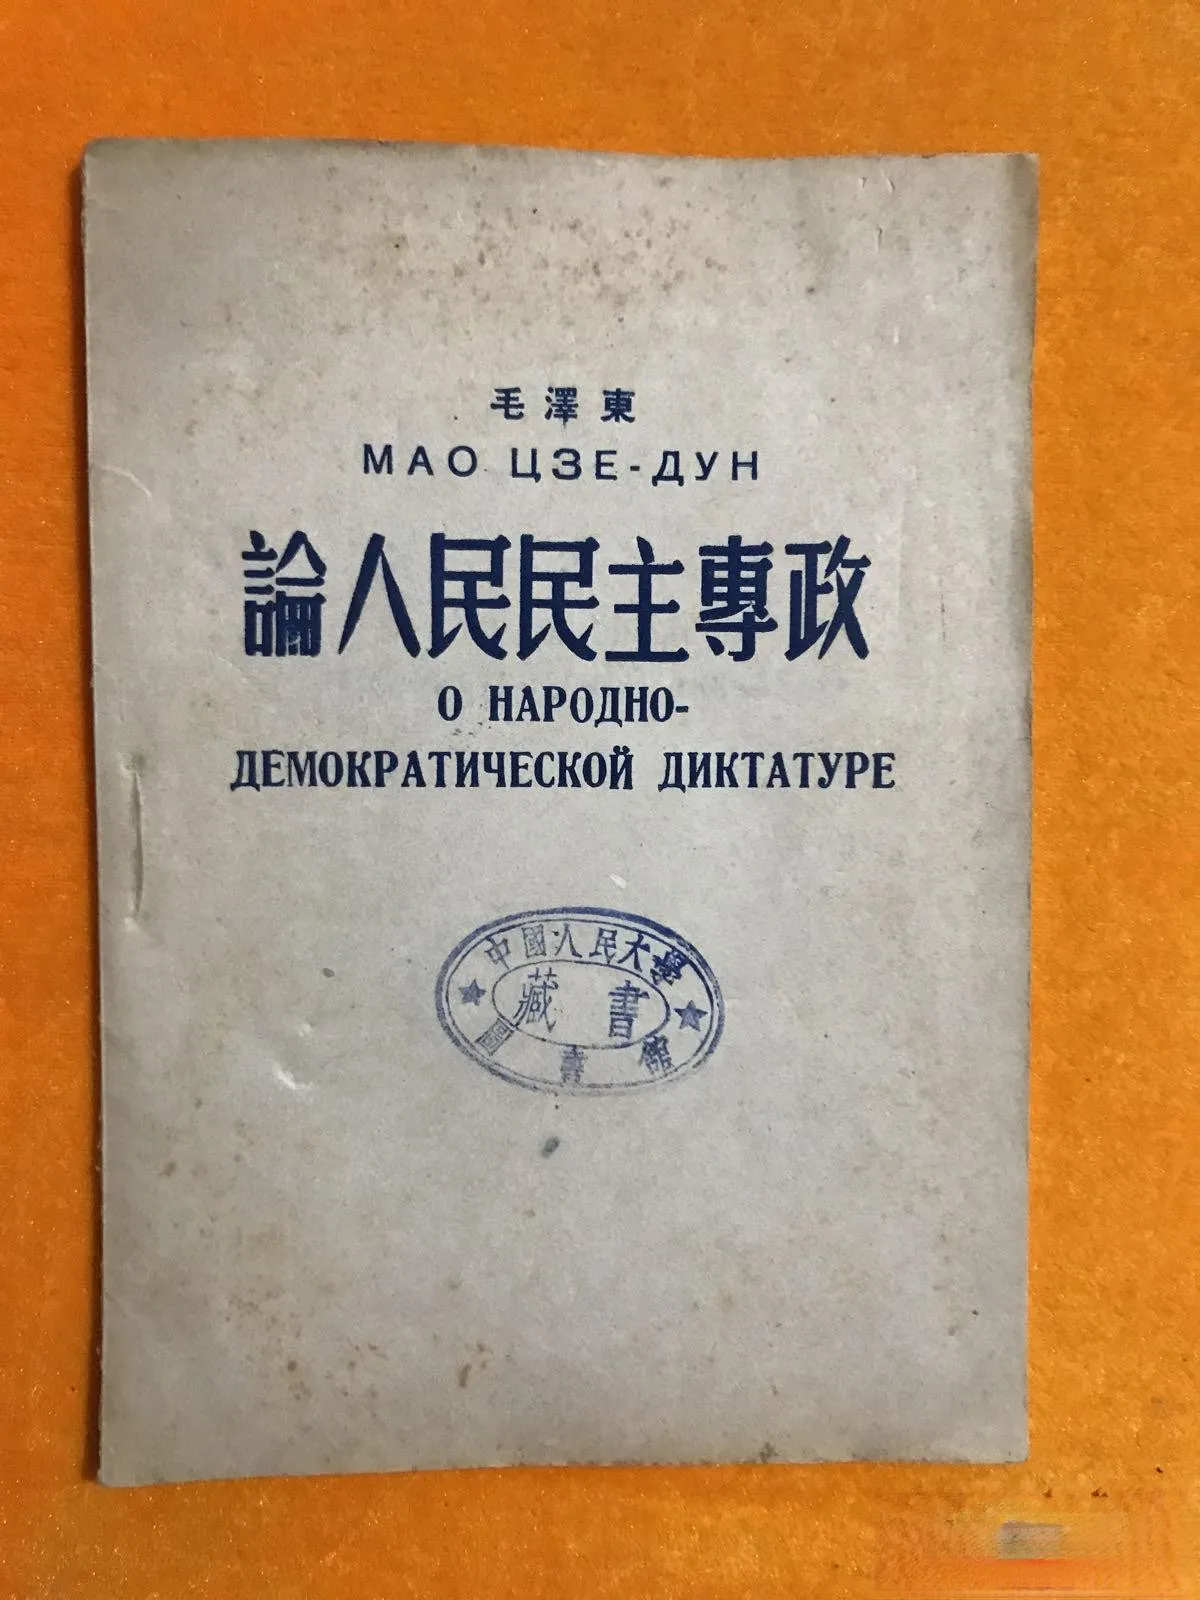 On the People's Democratic Dictatorship [Pamphlet of Mao Zedong's Works] 1950 pamphlet master excel 2010